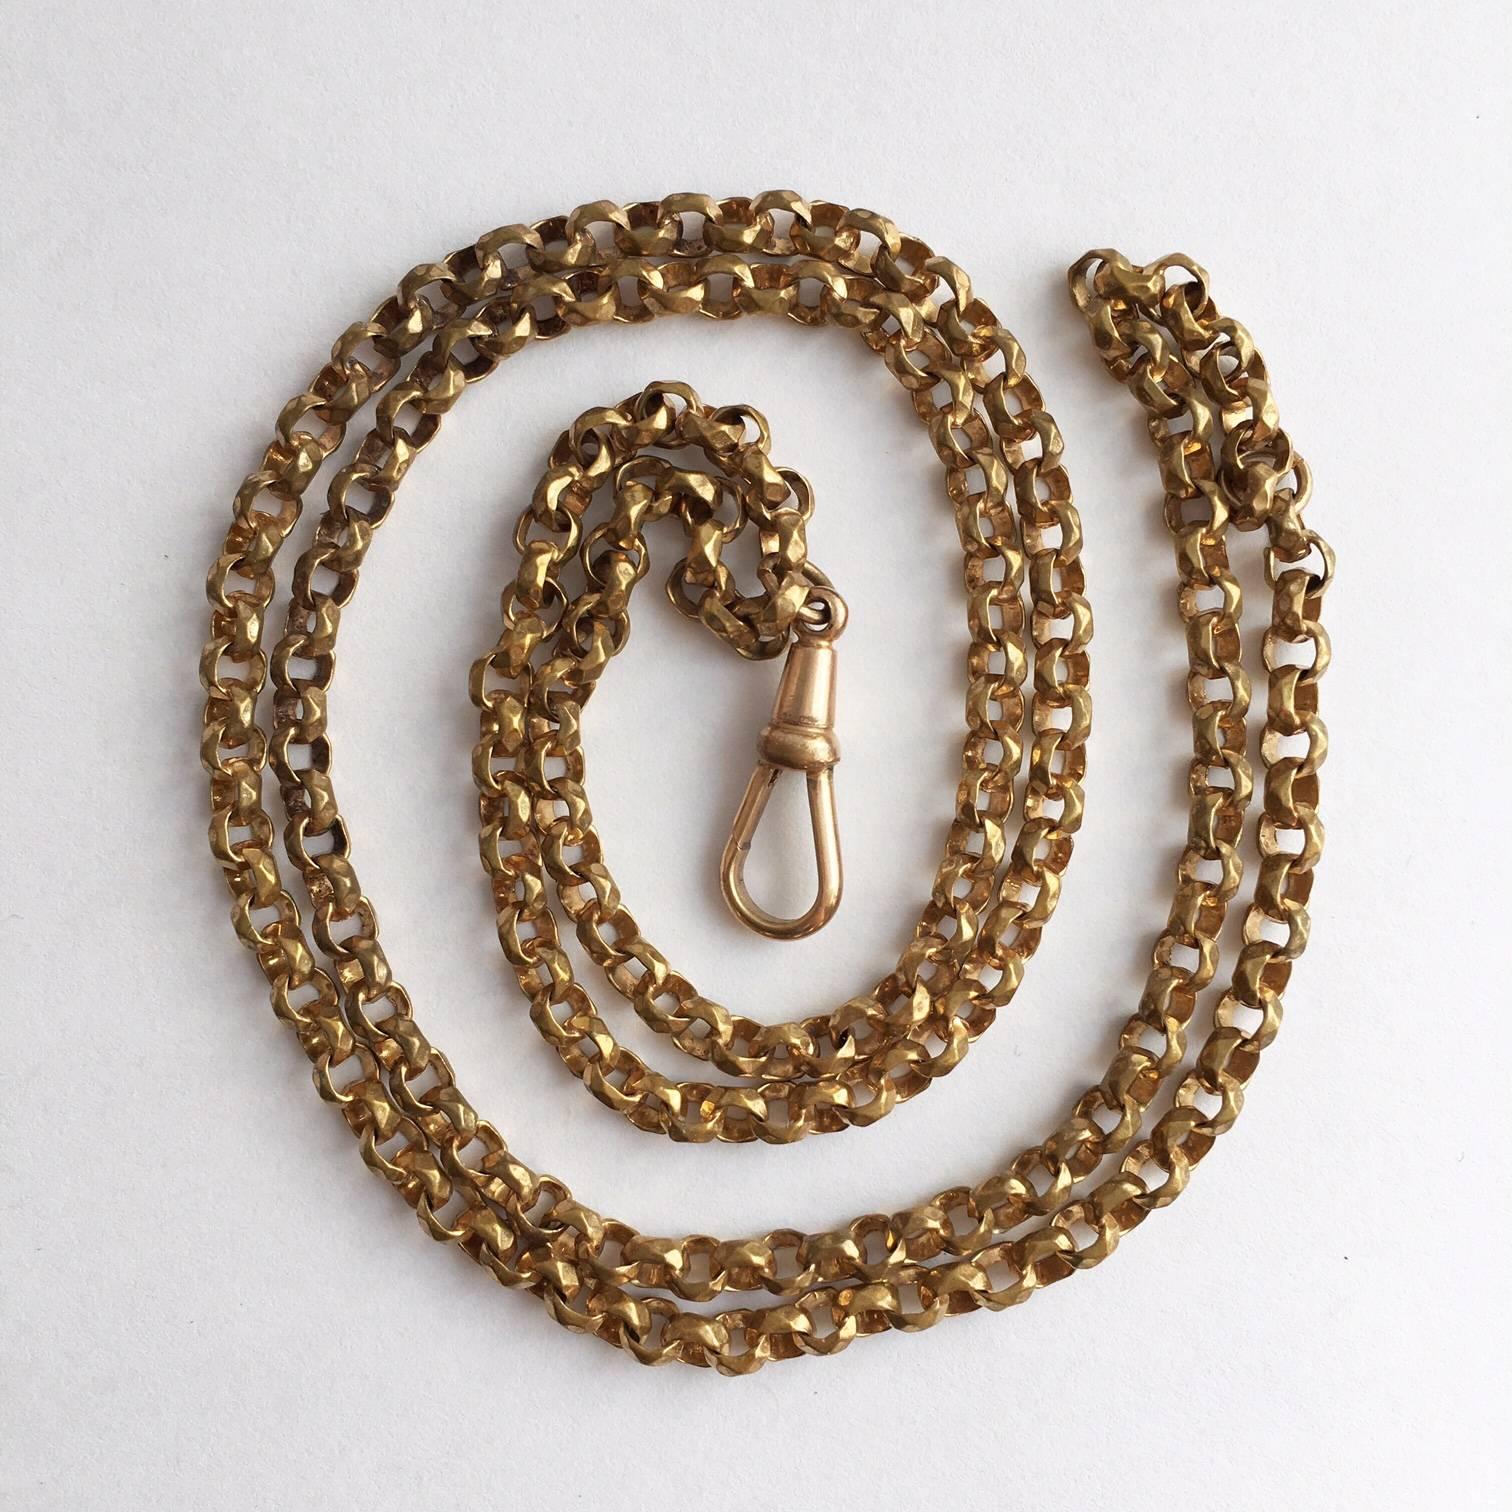 The queen of all chains, the guard chain is both stylish and incredibly useful. This is a lovely long gilt brass example with beautifully faceted links. End to end the necklace measures 72cm. It can be worn in a multitude of ways and the lobster